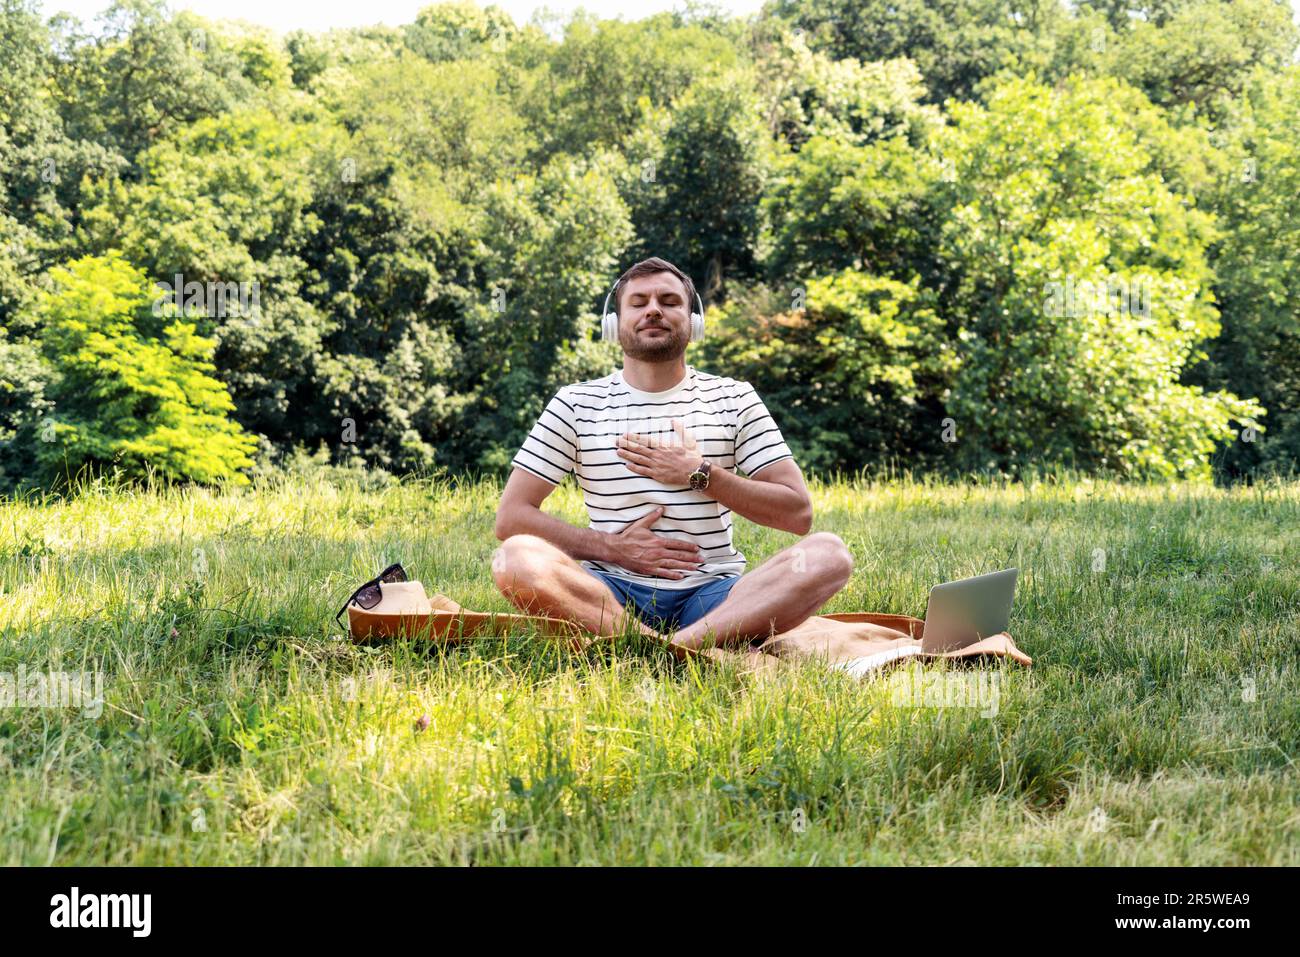 Man doing yoga breathing exercise sitting on the grass in city park in summer, listening to meditation music. Stock Photo